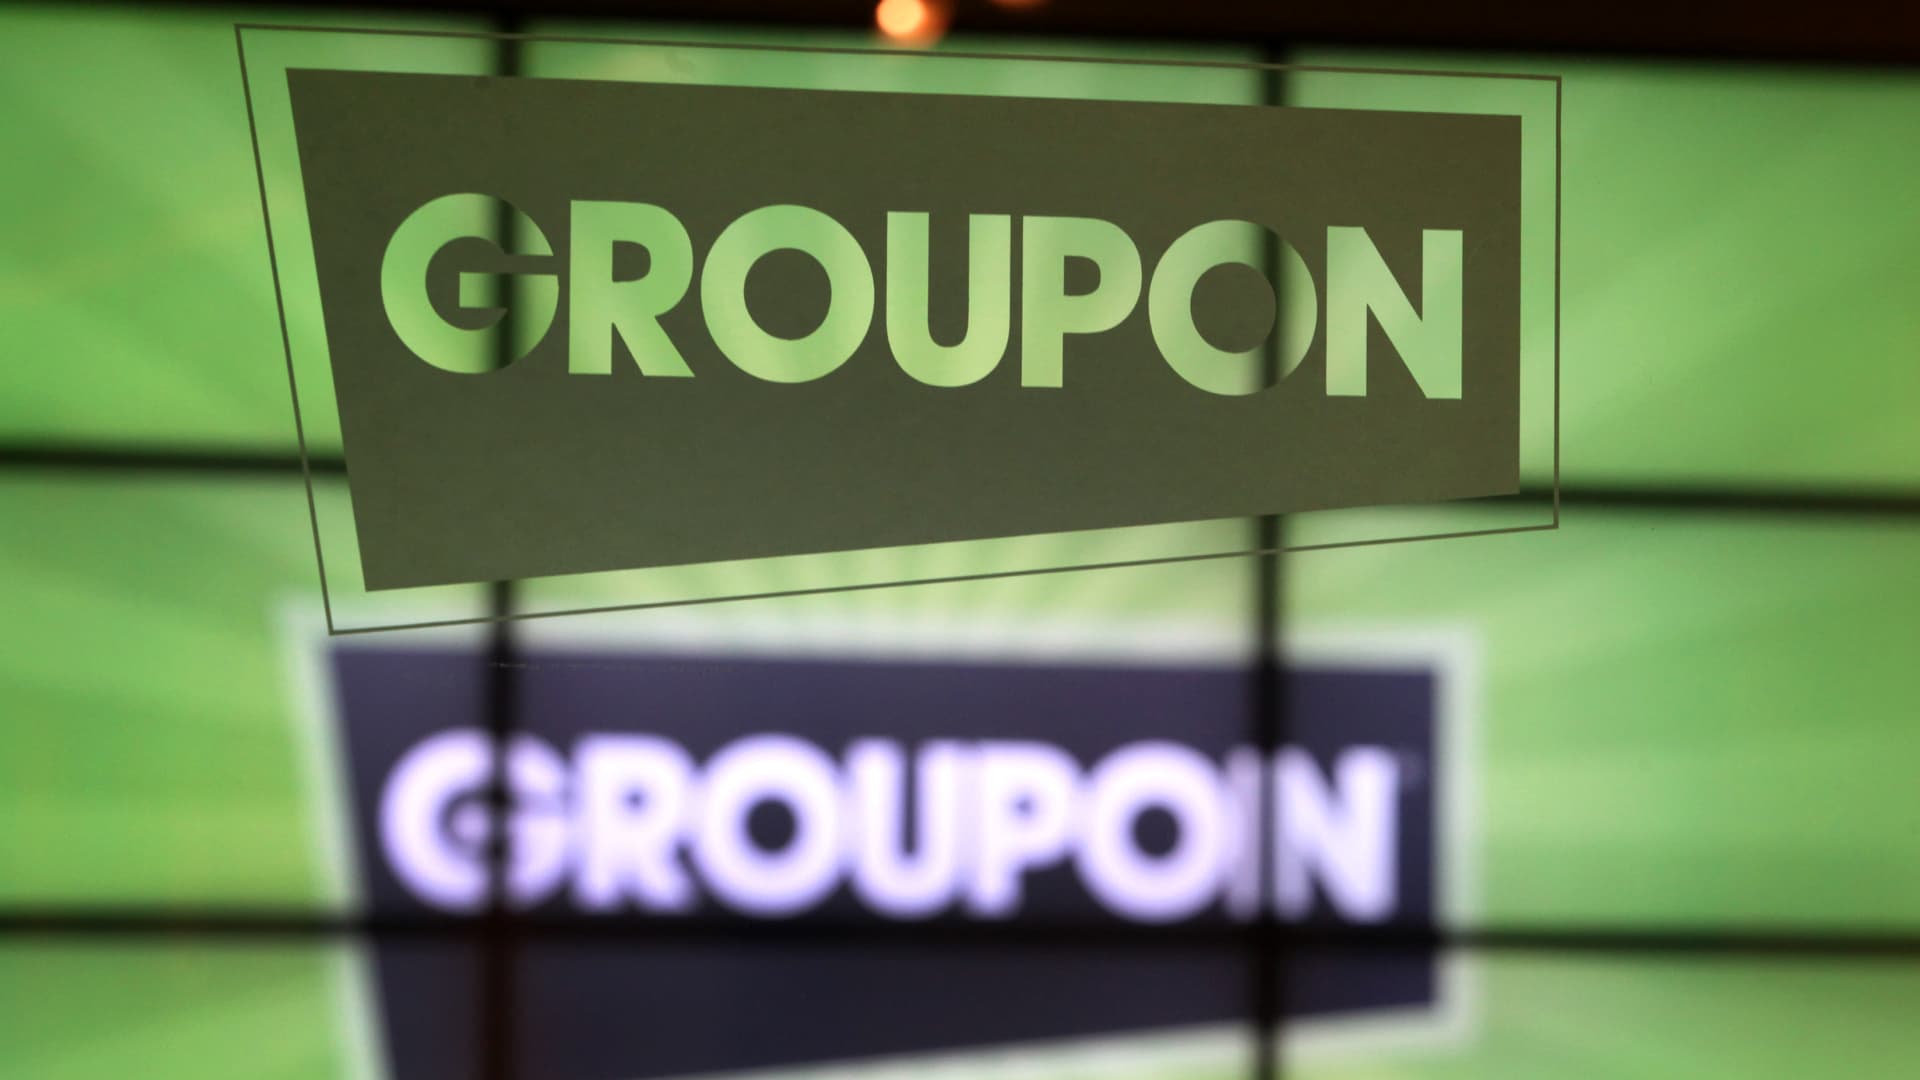 Stocks making the biggest moves midday: Groupon, Wynn Resorts, Plug Power, Illumina and more